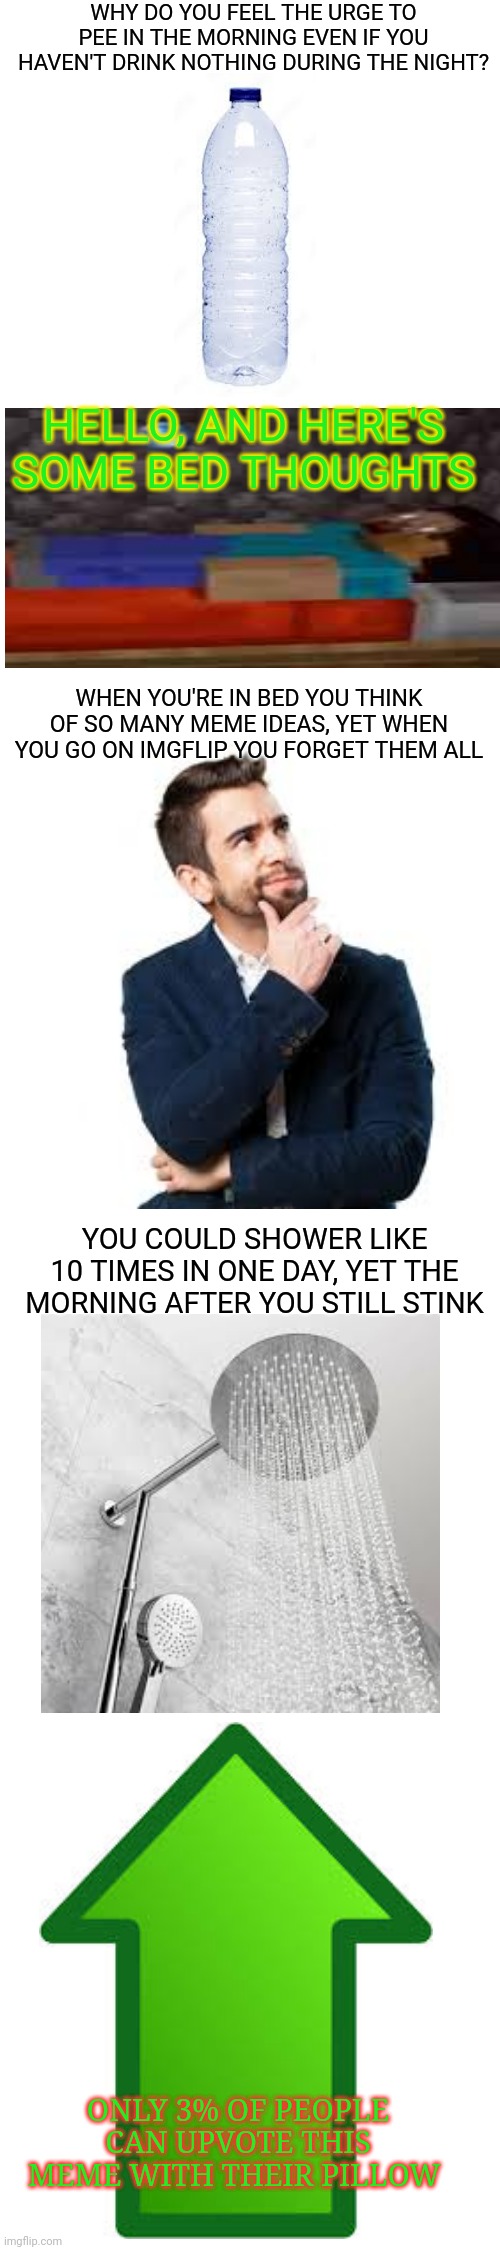 Bed memes | WHY DO YOU FEEL THE URGE TO PEE IN THE MORNING EVEN IF YOU HAVEN'T DRINK NOTHING DURING THE NIGHT? HELLO, AND HERE'S SOME BED THOUGHTS; WHEN YOU'RE IN BED YOU THINK OF SO MANY MEME IDEAS, YET WHEN YOU GO ON IMGFLIP YOU FORGET THEM ALL; YOU COULD SHOWER LIKE 10 TIMES IN ONE DAY, YET THE MORNING AFTER YOU STILL STINK; ONLY 3% OF PEOPLE CAN UPVOTE THIS MEME WITH THEIR PILLOW | image tagged in bed,memes,thoughts,bedtime,funny | made w/ Imgflip meme maker